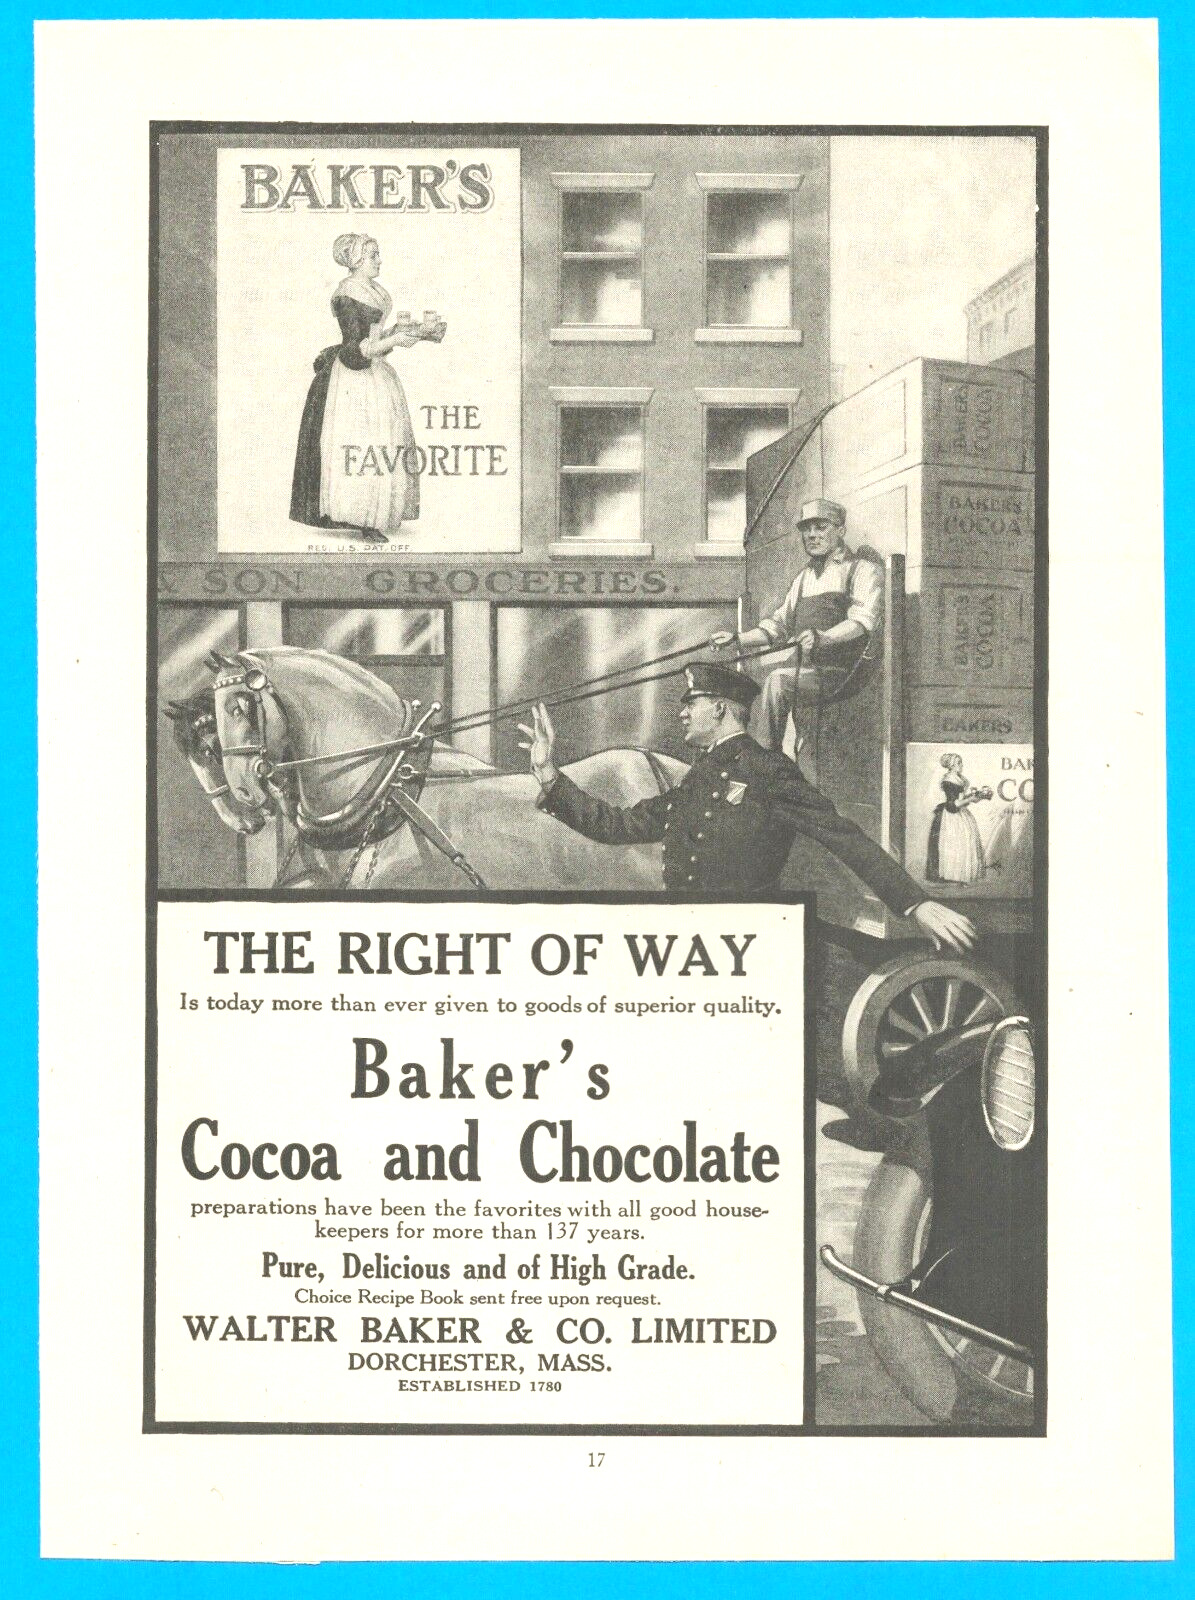 1918 BAKER's COCOA and CHOCOLATE candy grocer's PRINT AD Walter Baker DORCHESTER